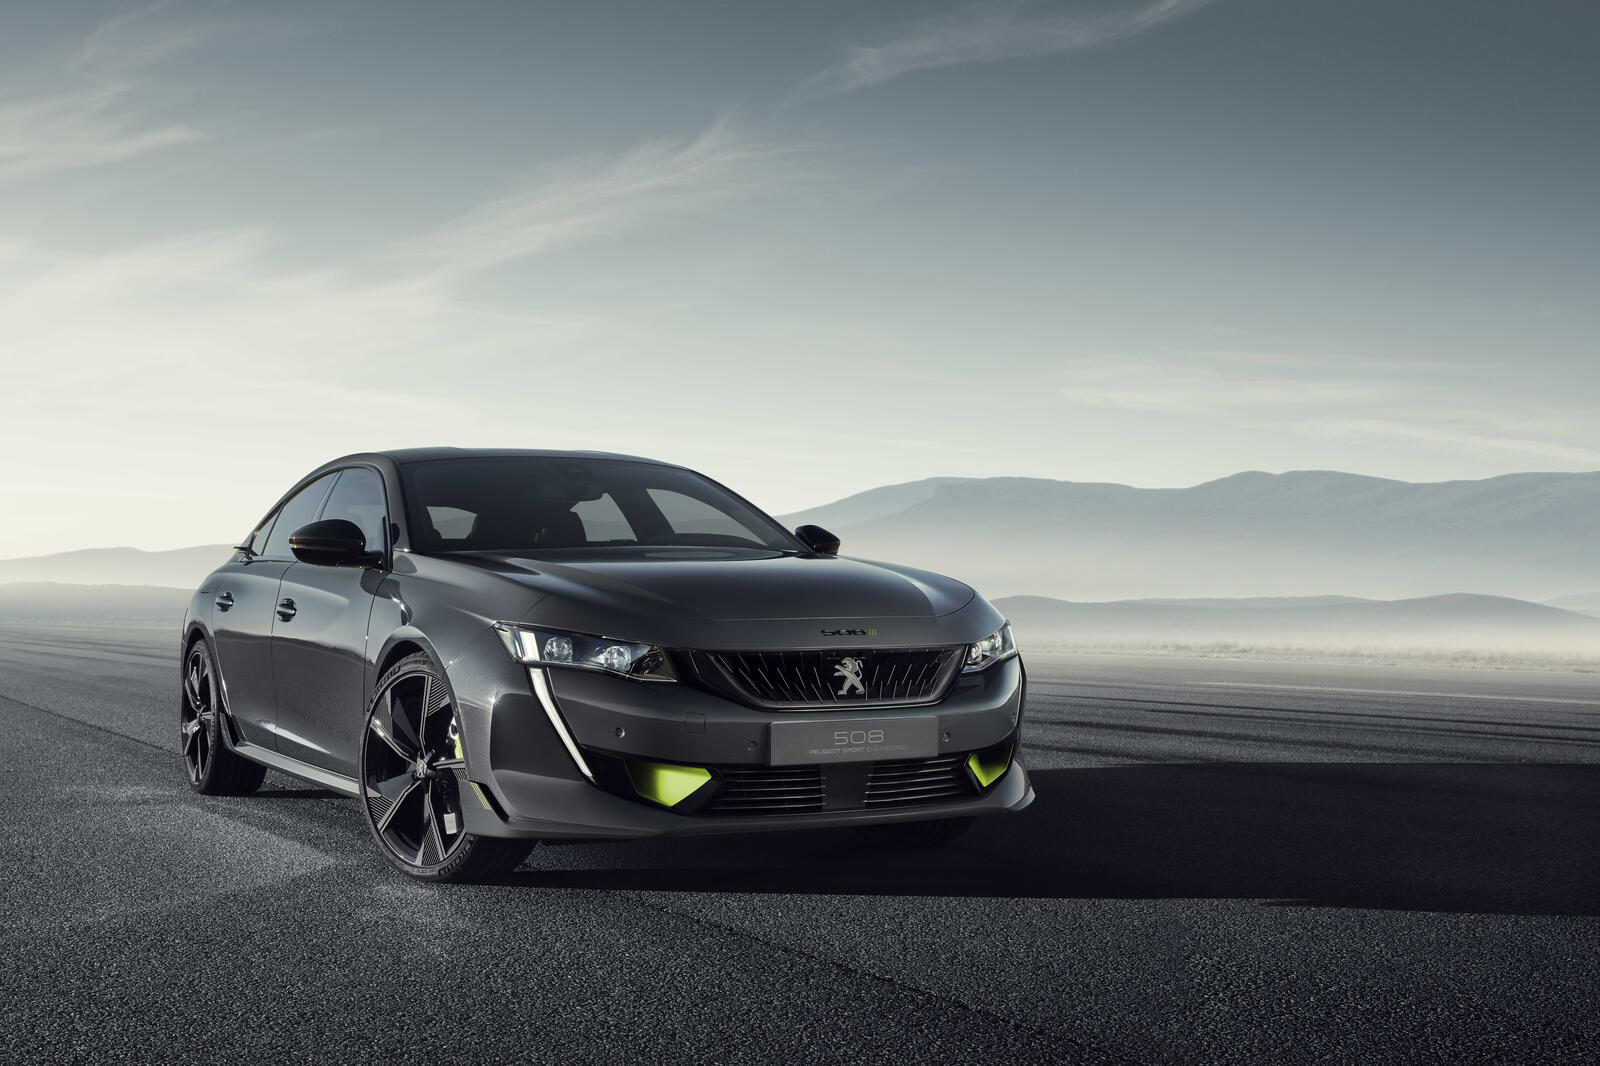 Wallpapers Peugeot 508 new on the track on the desktop